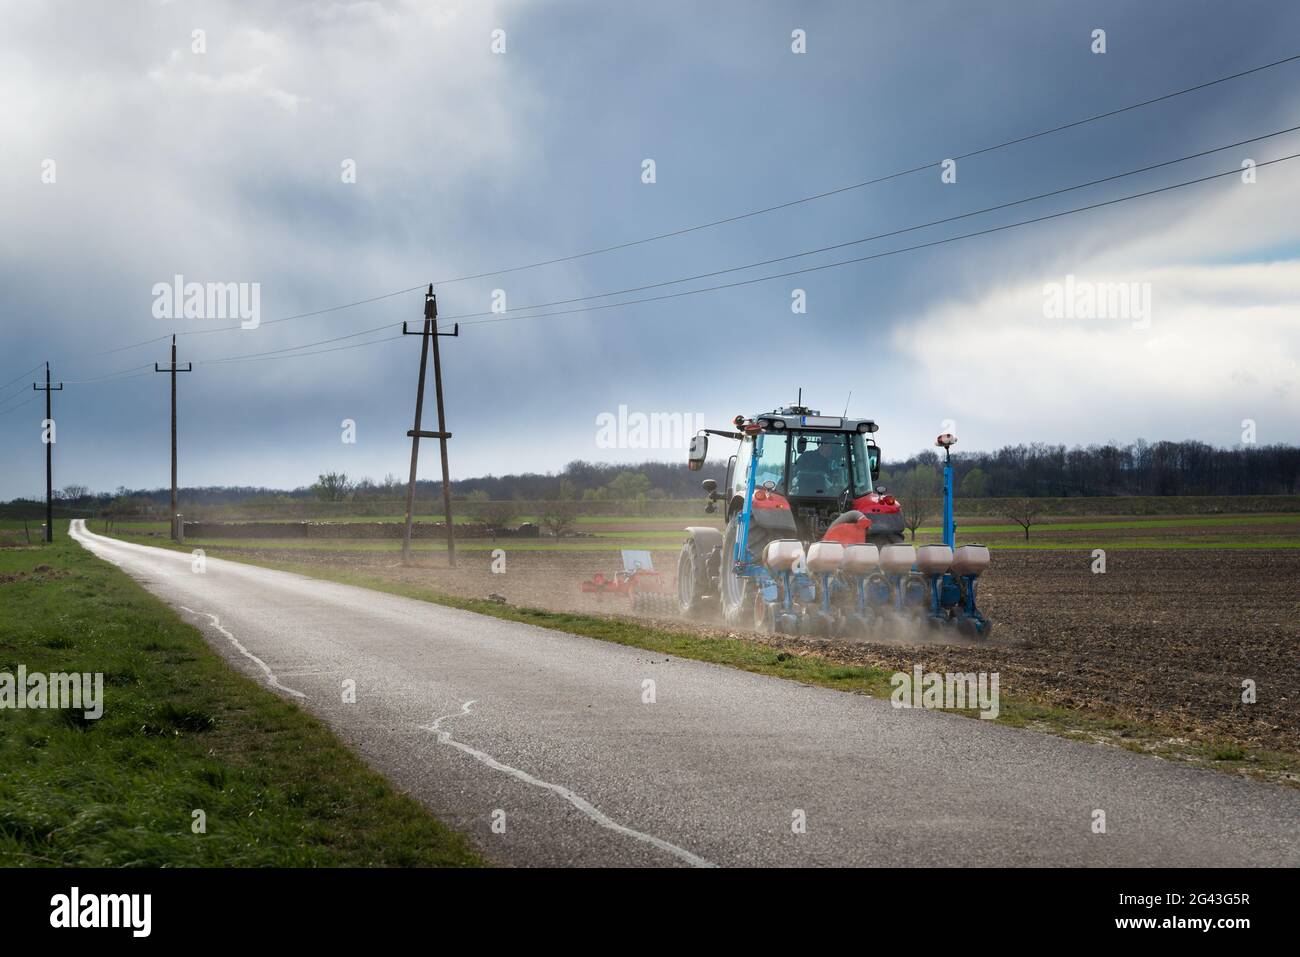 Tractor on a field seeding crop Stock Photo